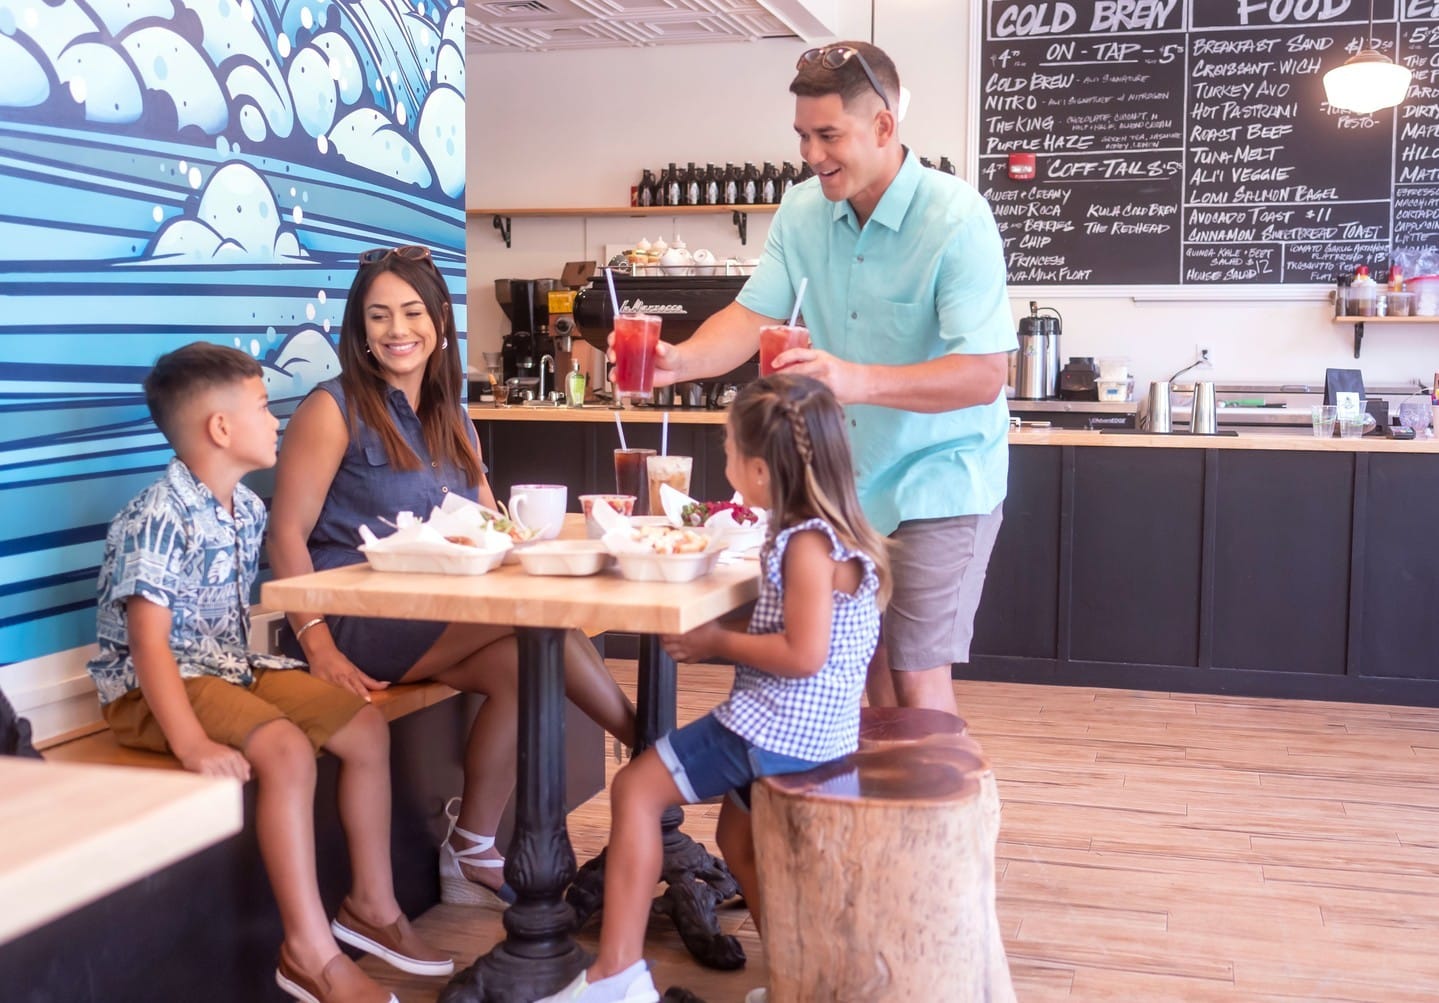 Congratulations to Aliʻi Coffee Co. and Kakaʻako Farmers Market on being named the Best of HONOLULU 2022 by @honolulumag! Explore the neighborhood and discover your island favorites!